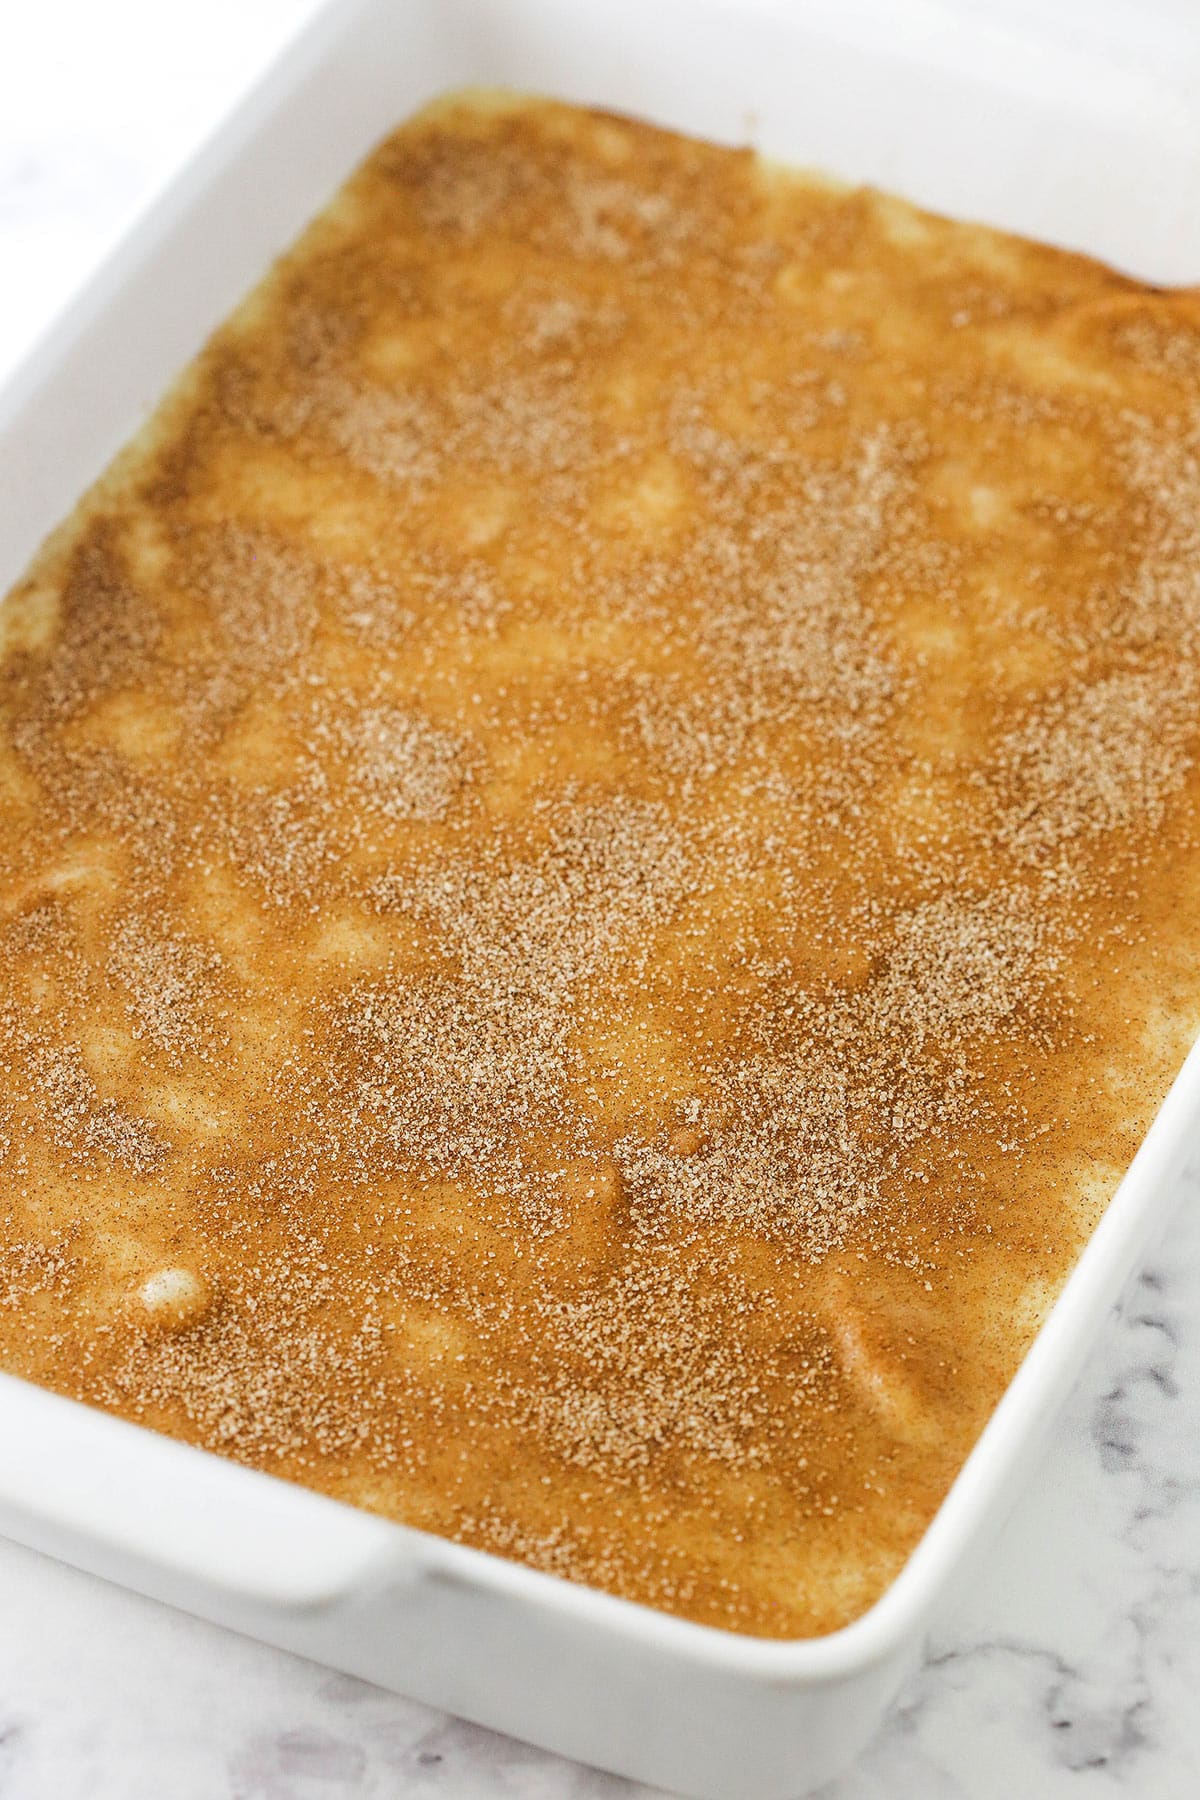 An unbaked apple cobbler inside of a white baking dish with handles